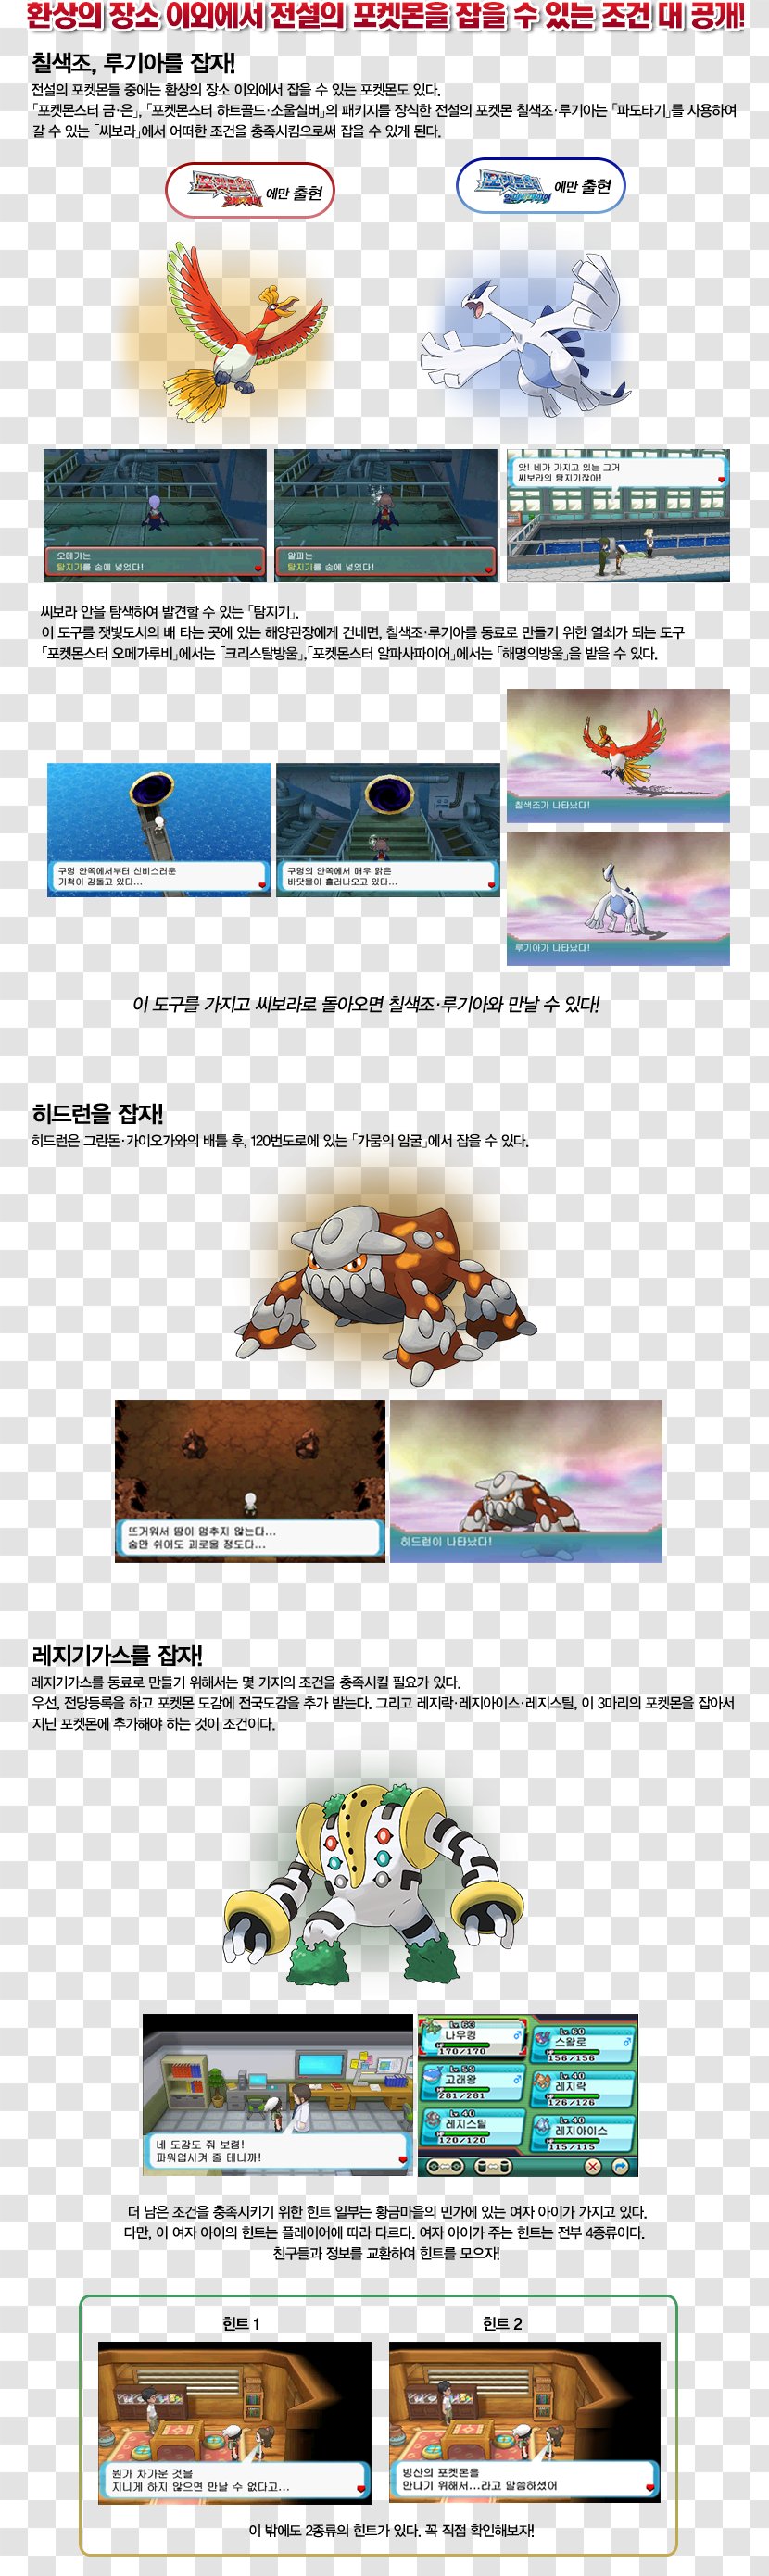 Pokémon HeartGold And SoulSilver Platinum ポケットモンスタープラチナ公式完全クリアガイド Web Page - Templates Transparent PNG